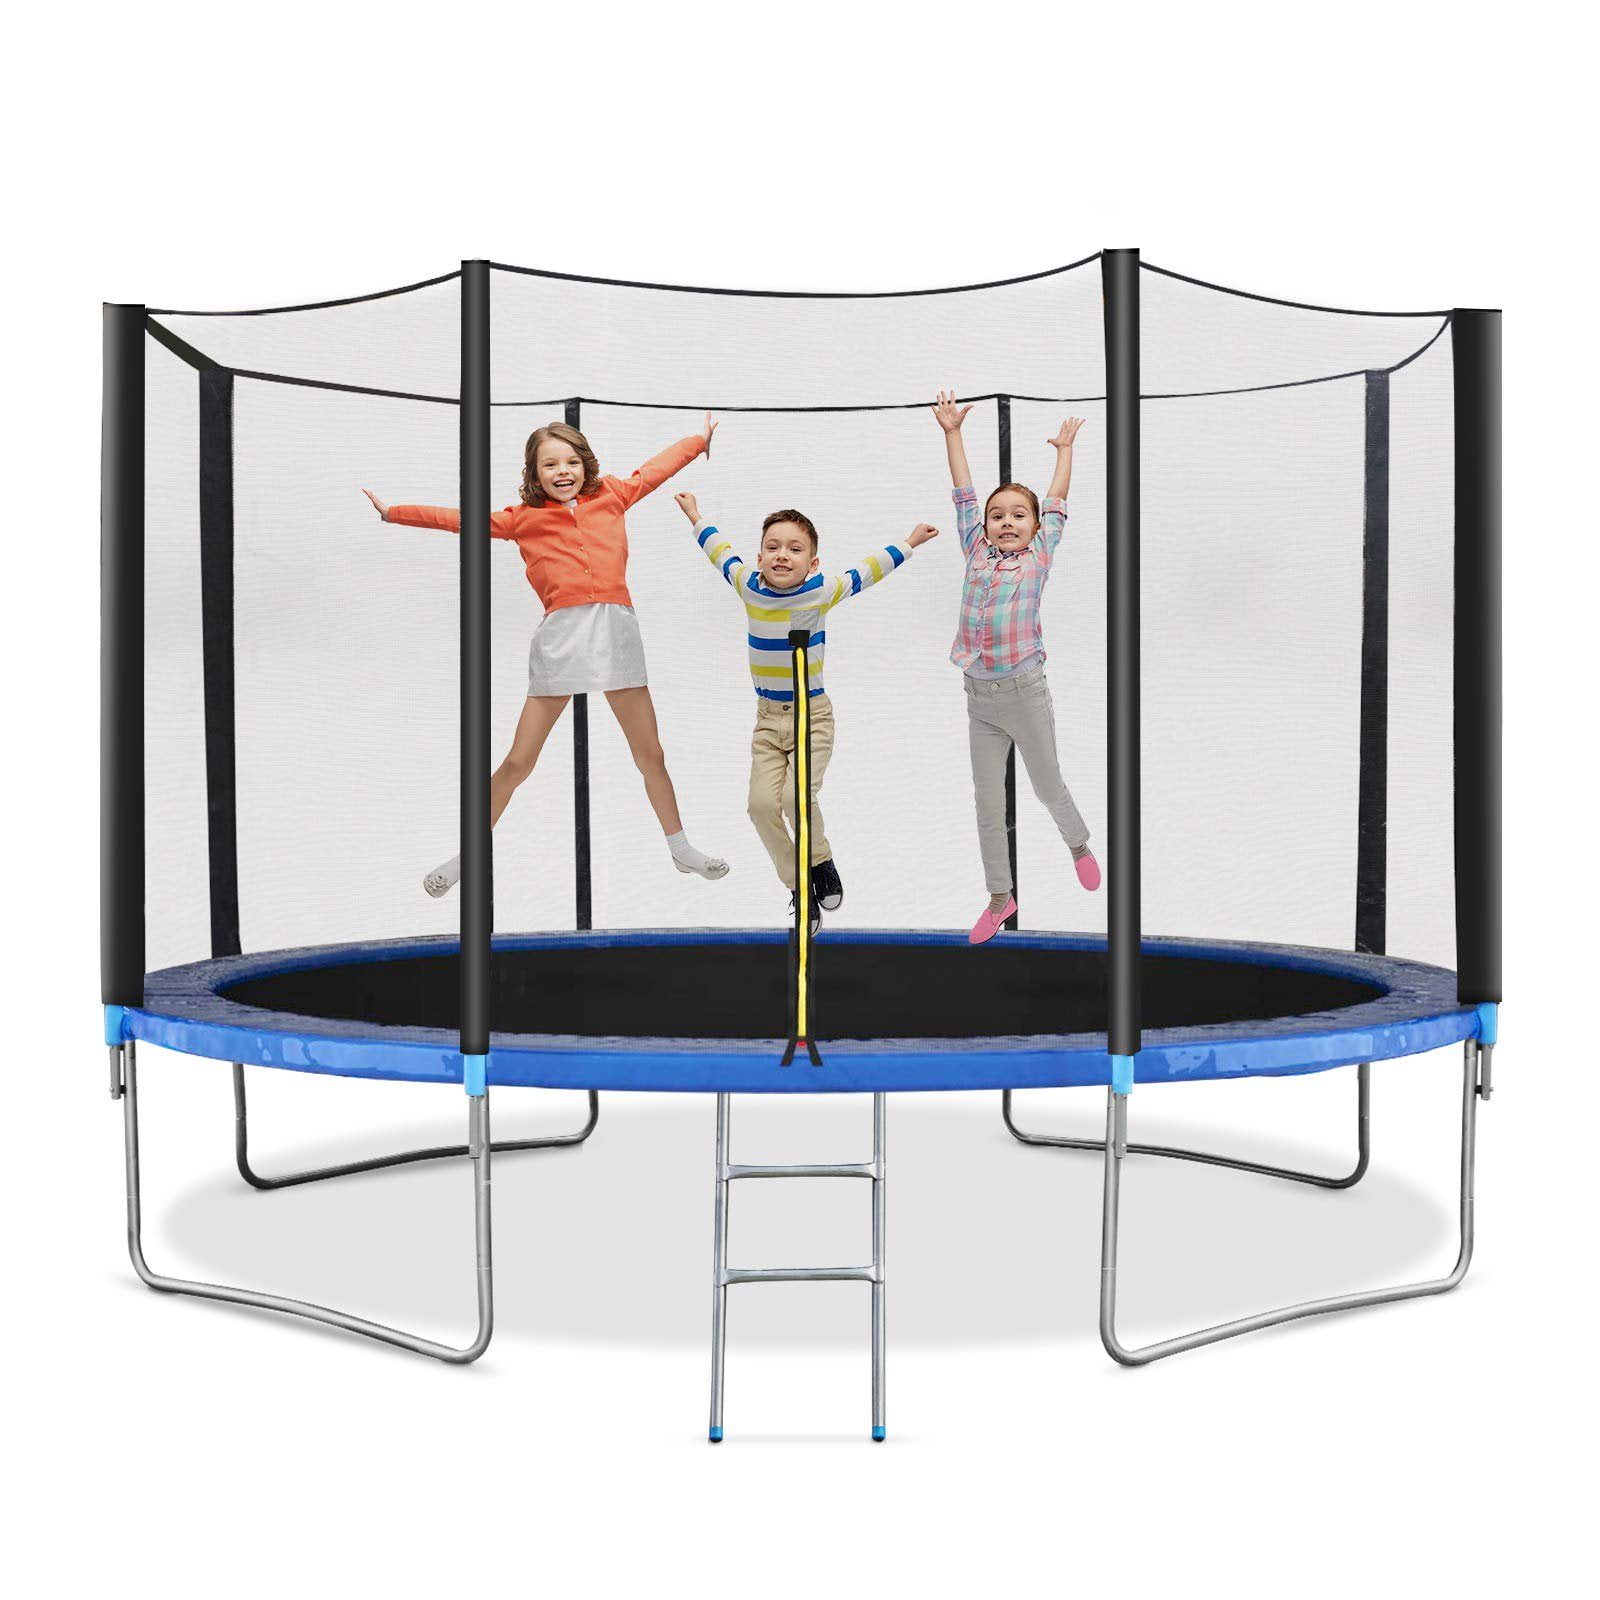 Youdw 10 FT Outdoor Kids Adult Trampoline with Enclosure Net Jumping Mat and Spring Cover Padding Large Bungee Bed with Protective net with Safety Enclosure Net Spring Pad Great Gift Blue